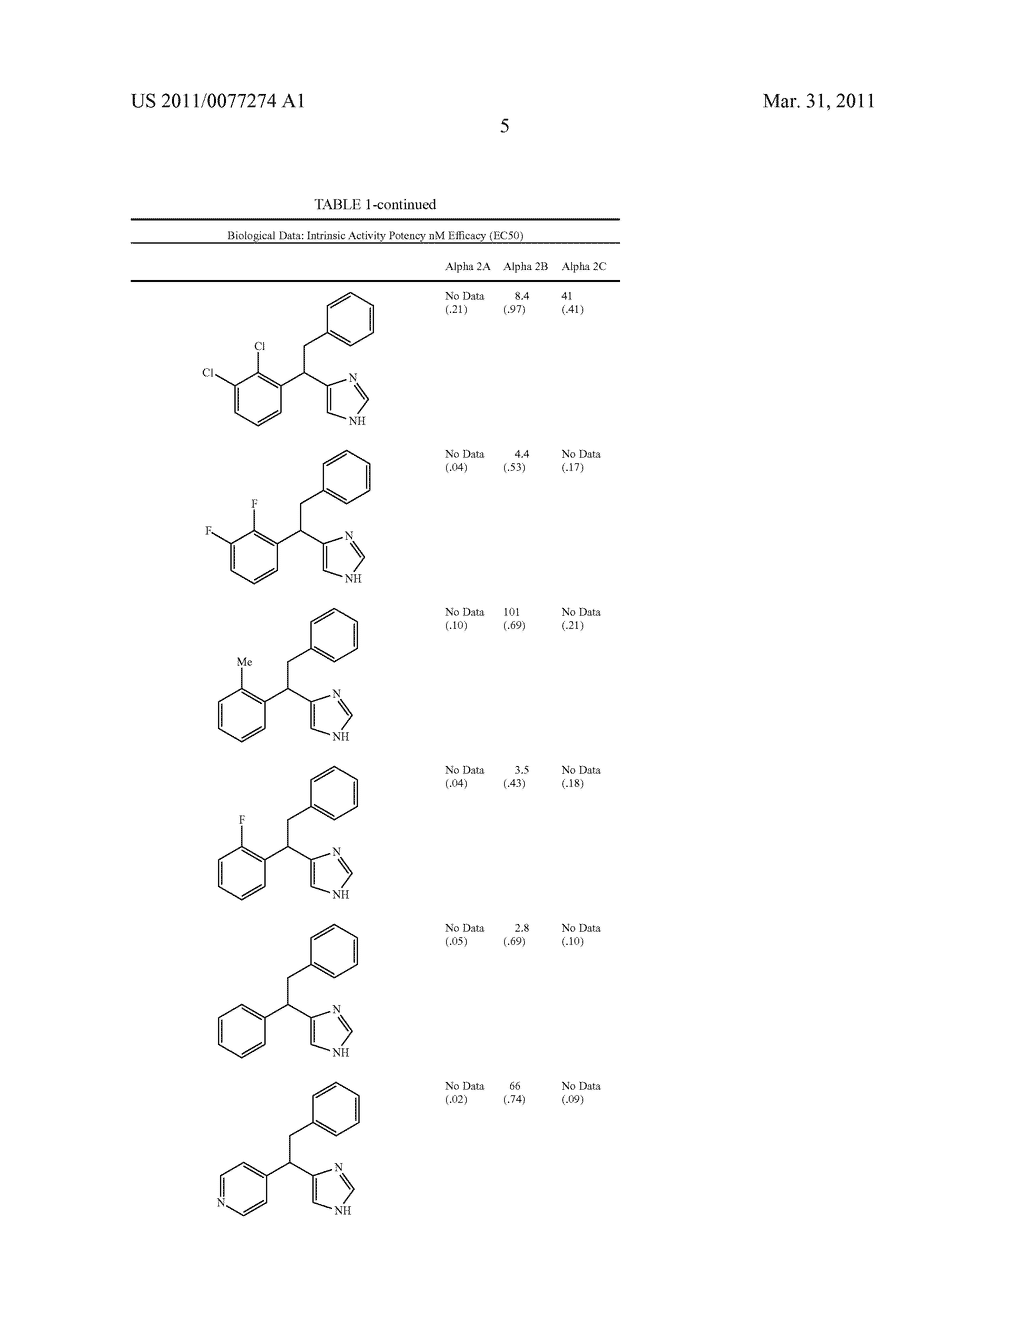 SUBSTITUTED-ARYL-2-PHENYLETHYL-1H-IMIDAZOLE COMPOUNDS AS SUBTYPE SELECTIVE MODULATORS OF ALPHA 2B AND/OR ALPHA 2C ADRENERGIC RECEPTORS - diagram, schematic, and image 06